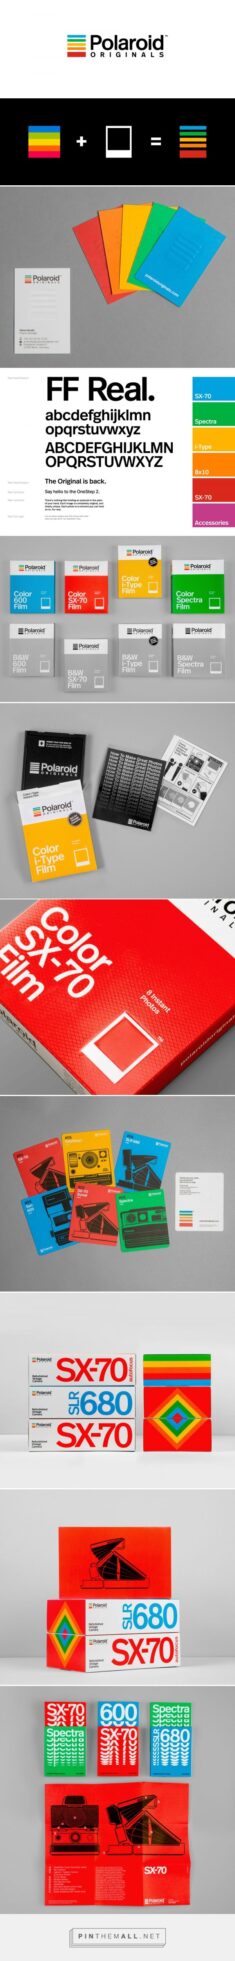 Brand New: New Logo, Identity, and Packaging for Polaroid Originals done In-house… – ...